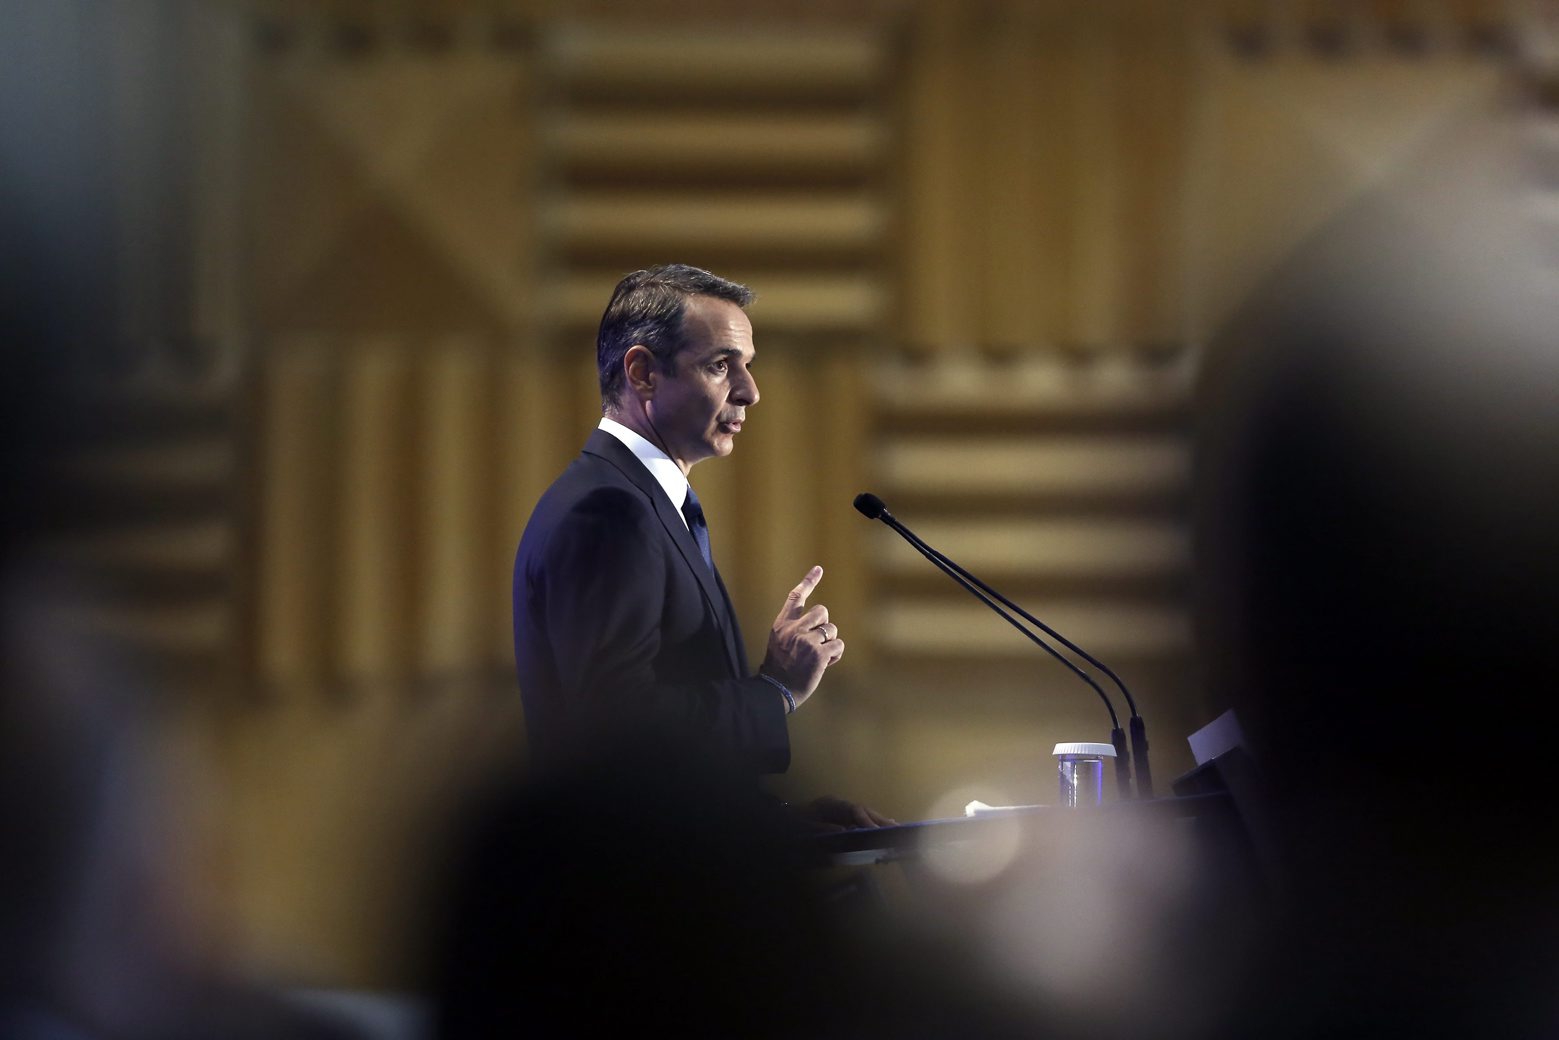 epa07826474 Greek Prime Minister Kyriakos Mitsotakis addresses the inaugural ceremony of the 84th Thessaloniki International Fair in Thessaloniki, Greece, 07 September 2019. The 84th edition of the business exhibition runs from 07 to 15 September 2019.  EPA/KOSTAS TSIRONIS GREECE THESSALONIKI INTERNATIONAL FAIR